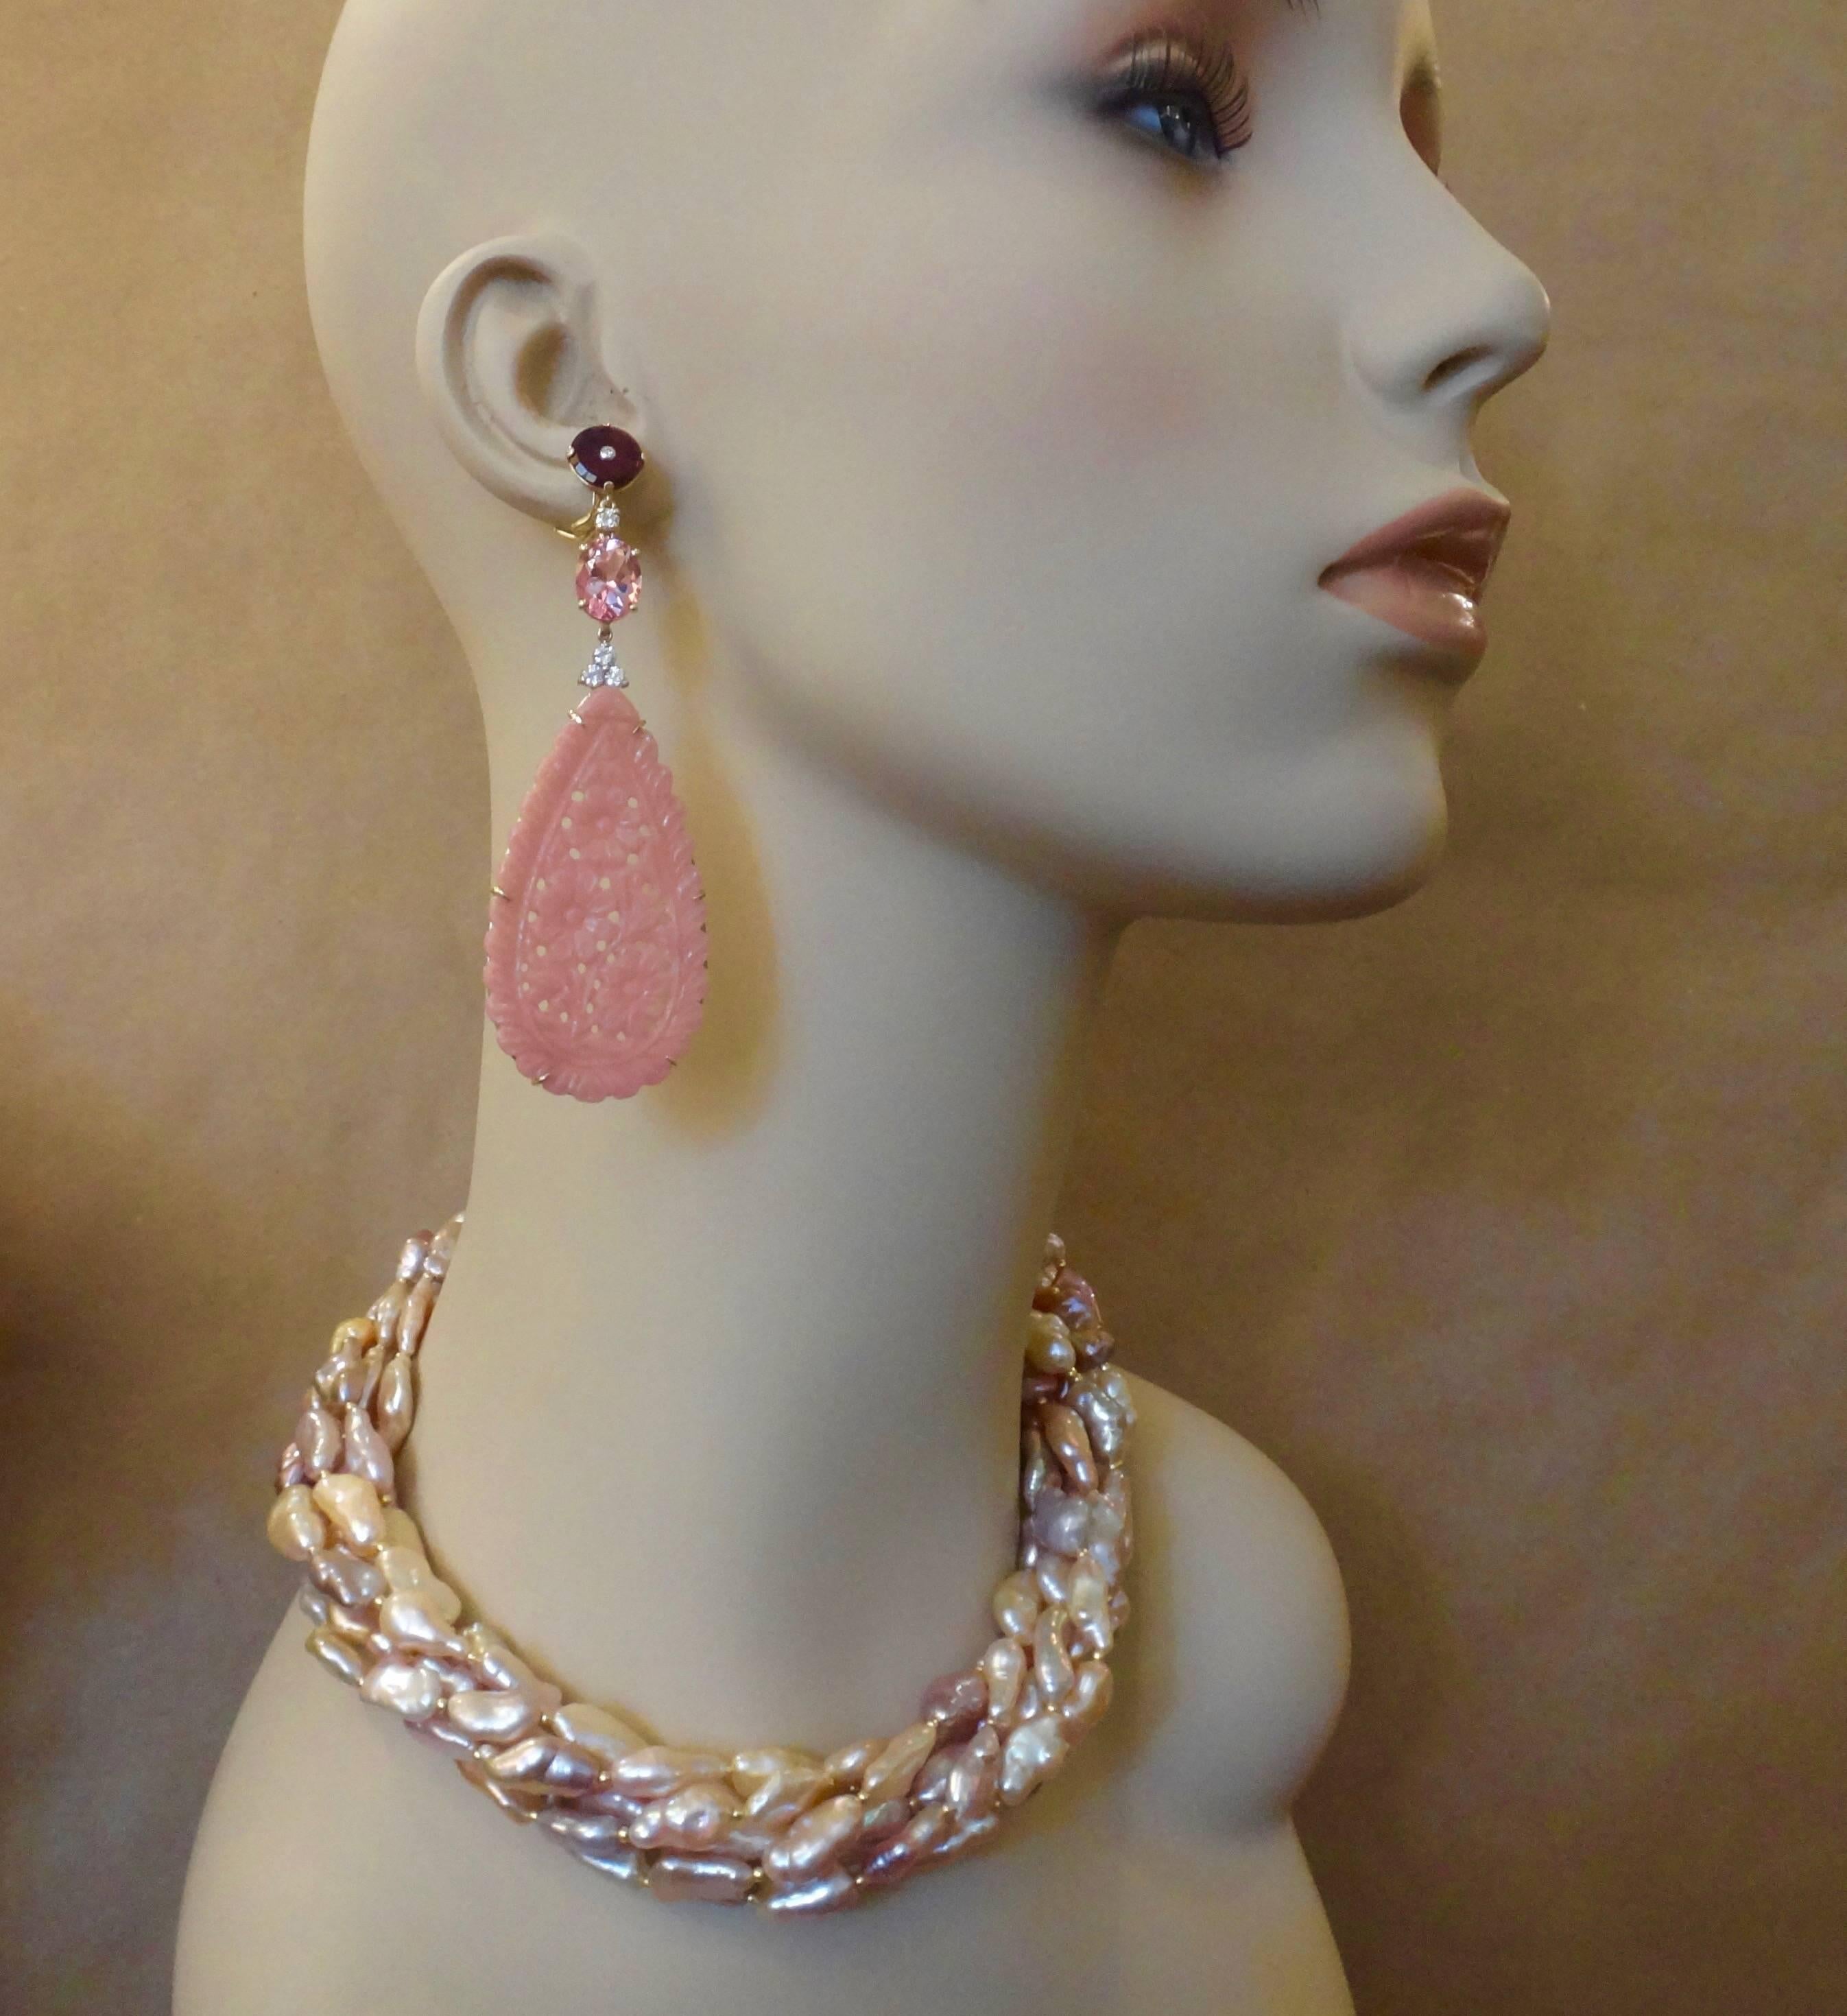 Six strands of oblong shaped freshwater pearls in various shades of pink, mauve and lavender are twisted together to form this torsade necklace.  The pearls possess a bright luster and brilliant sheen.  They are spaced with small gold beads.  The